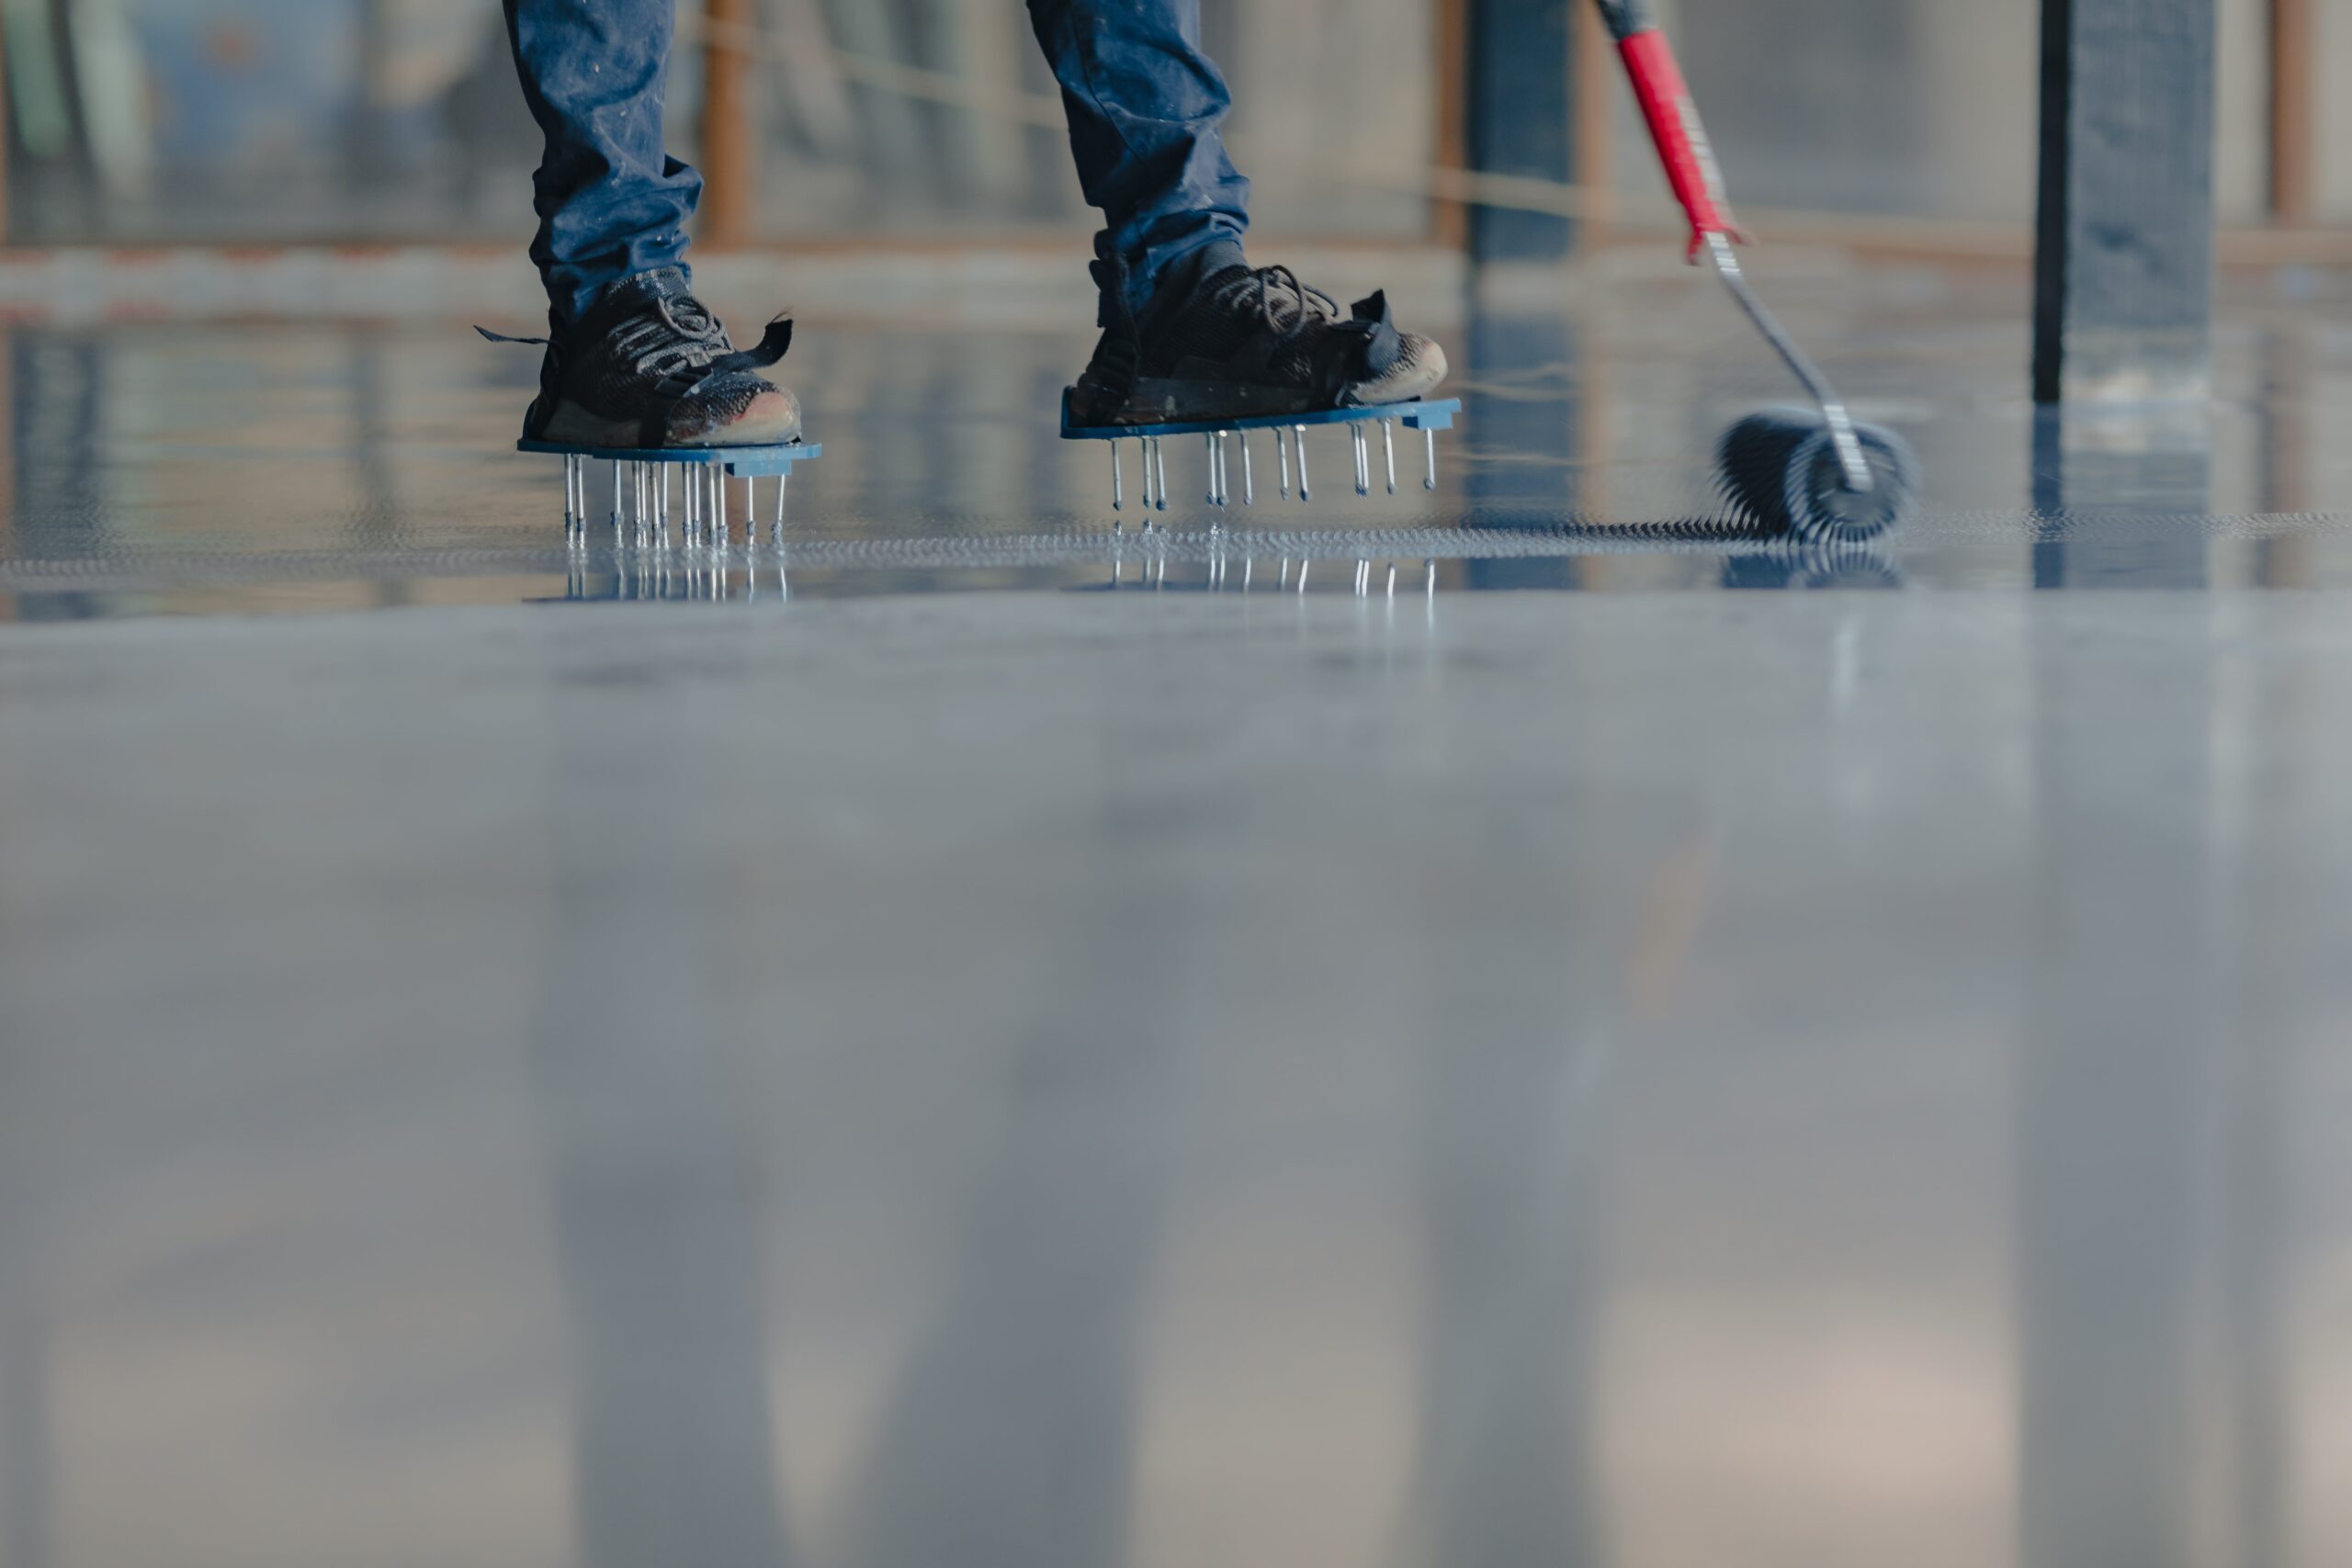 Painting Garage Floor: The New Jersey Garage Design Difference